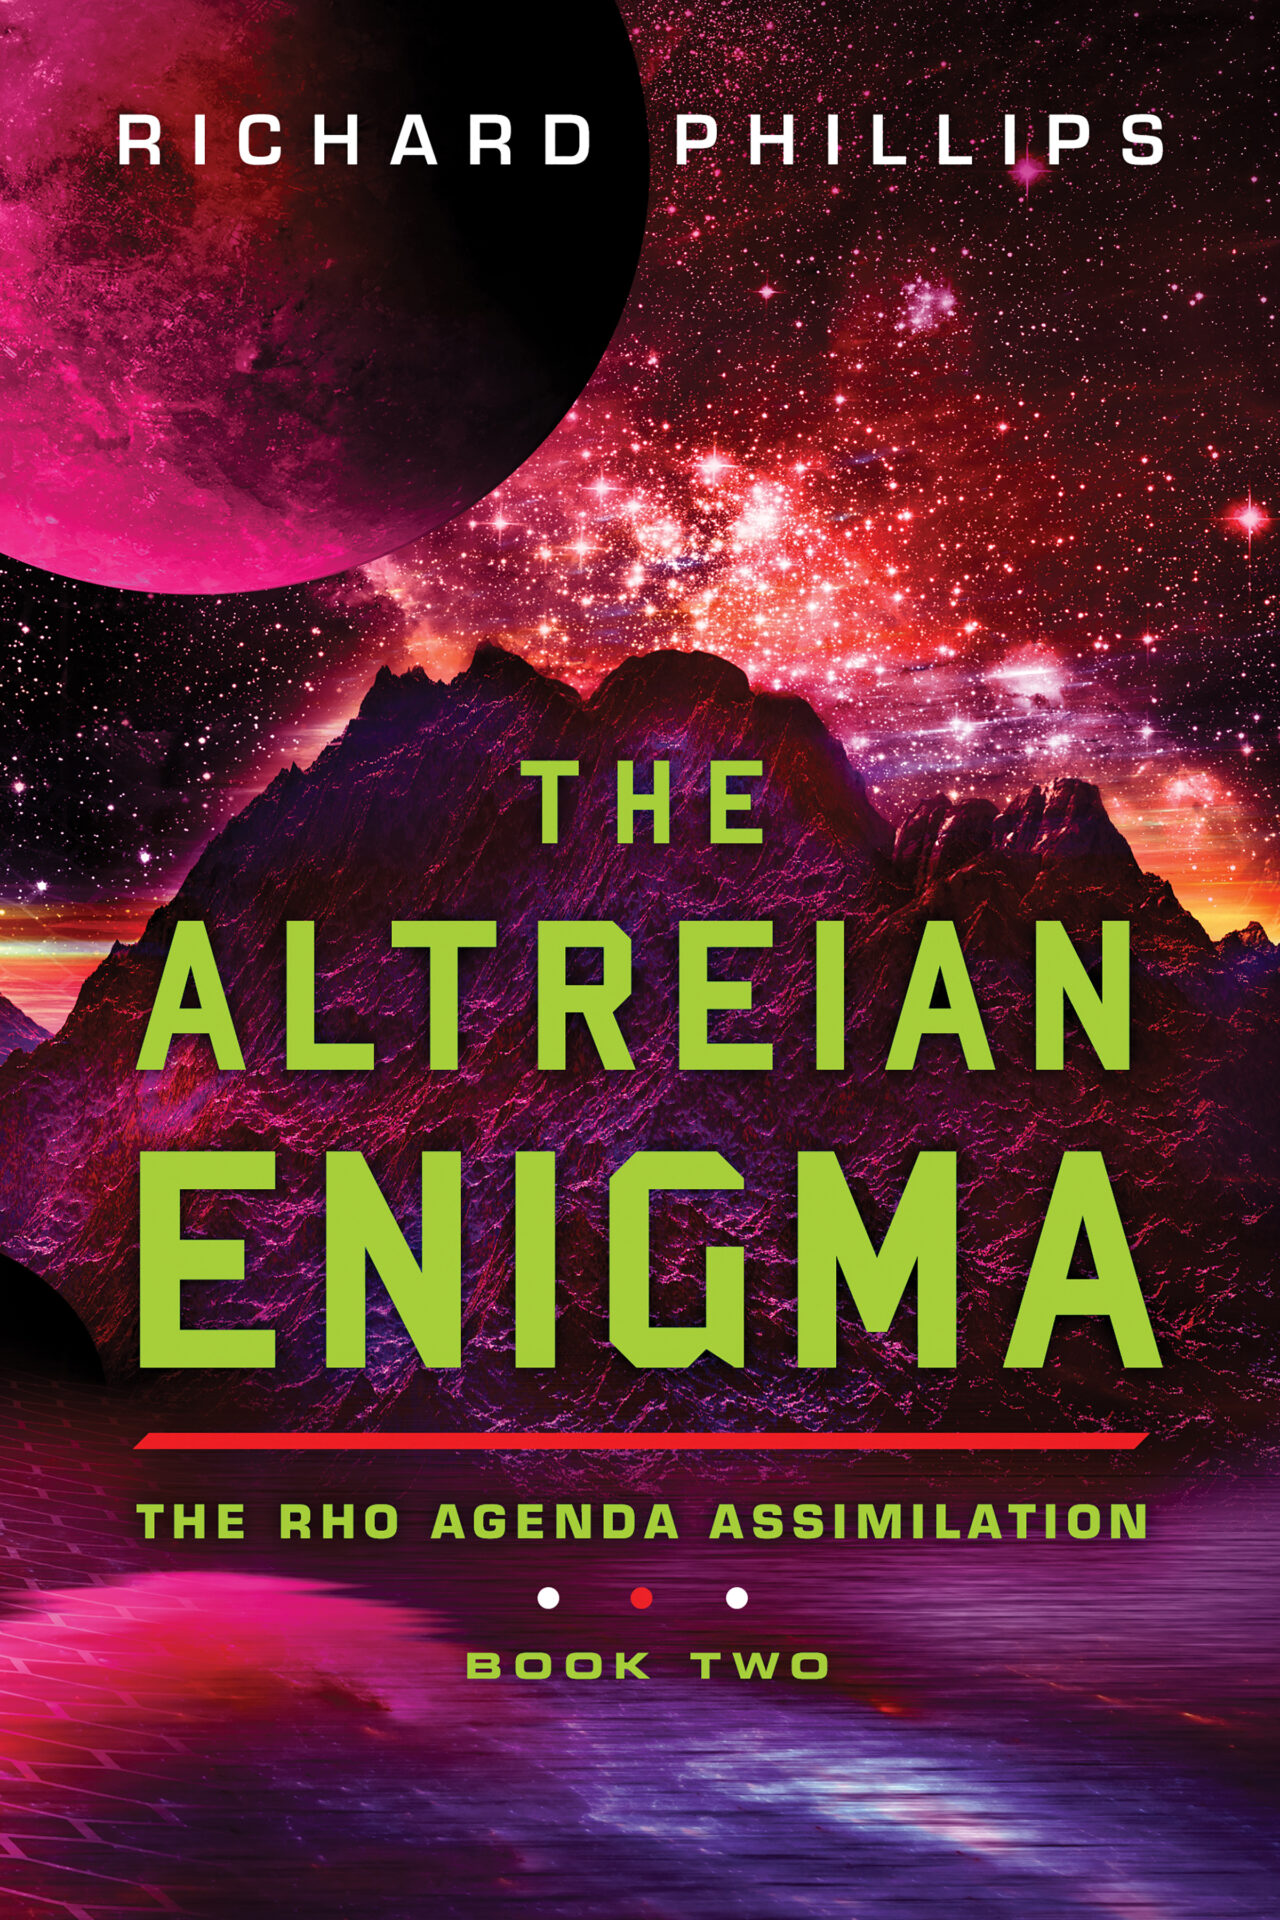 The Altreian Enigma by Richard Phillips